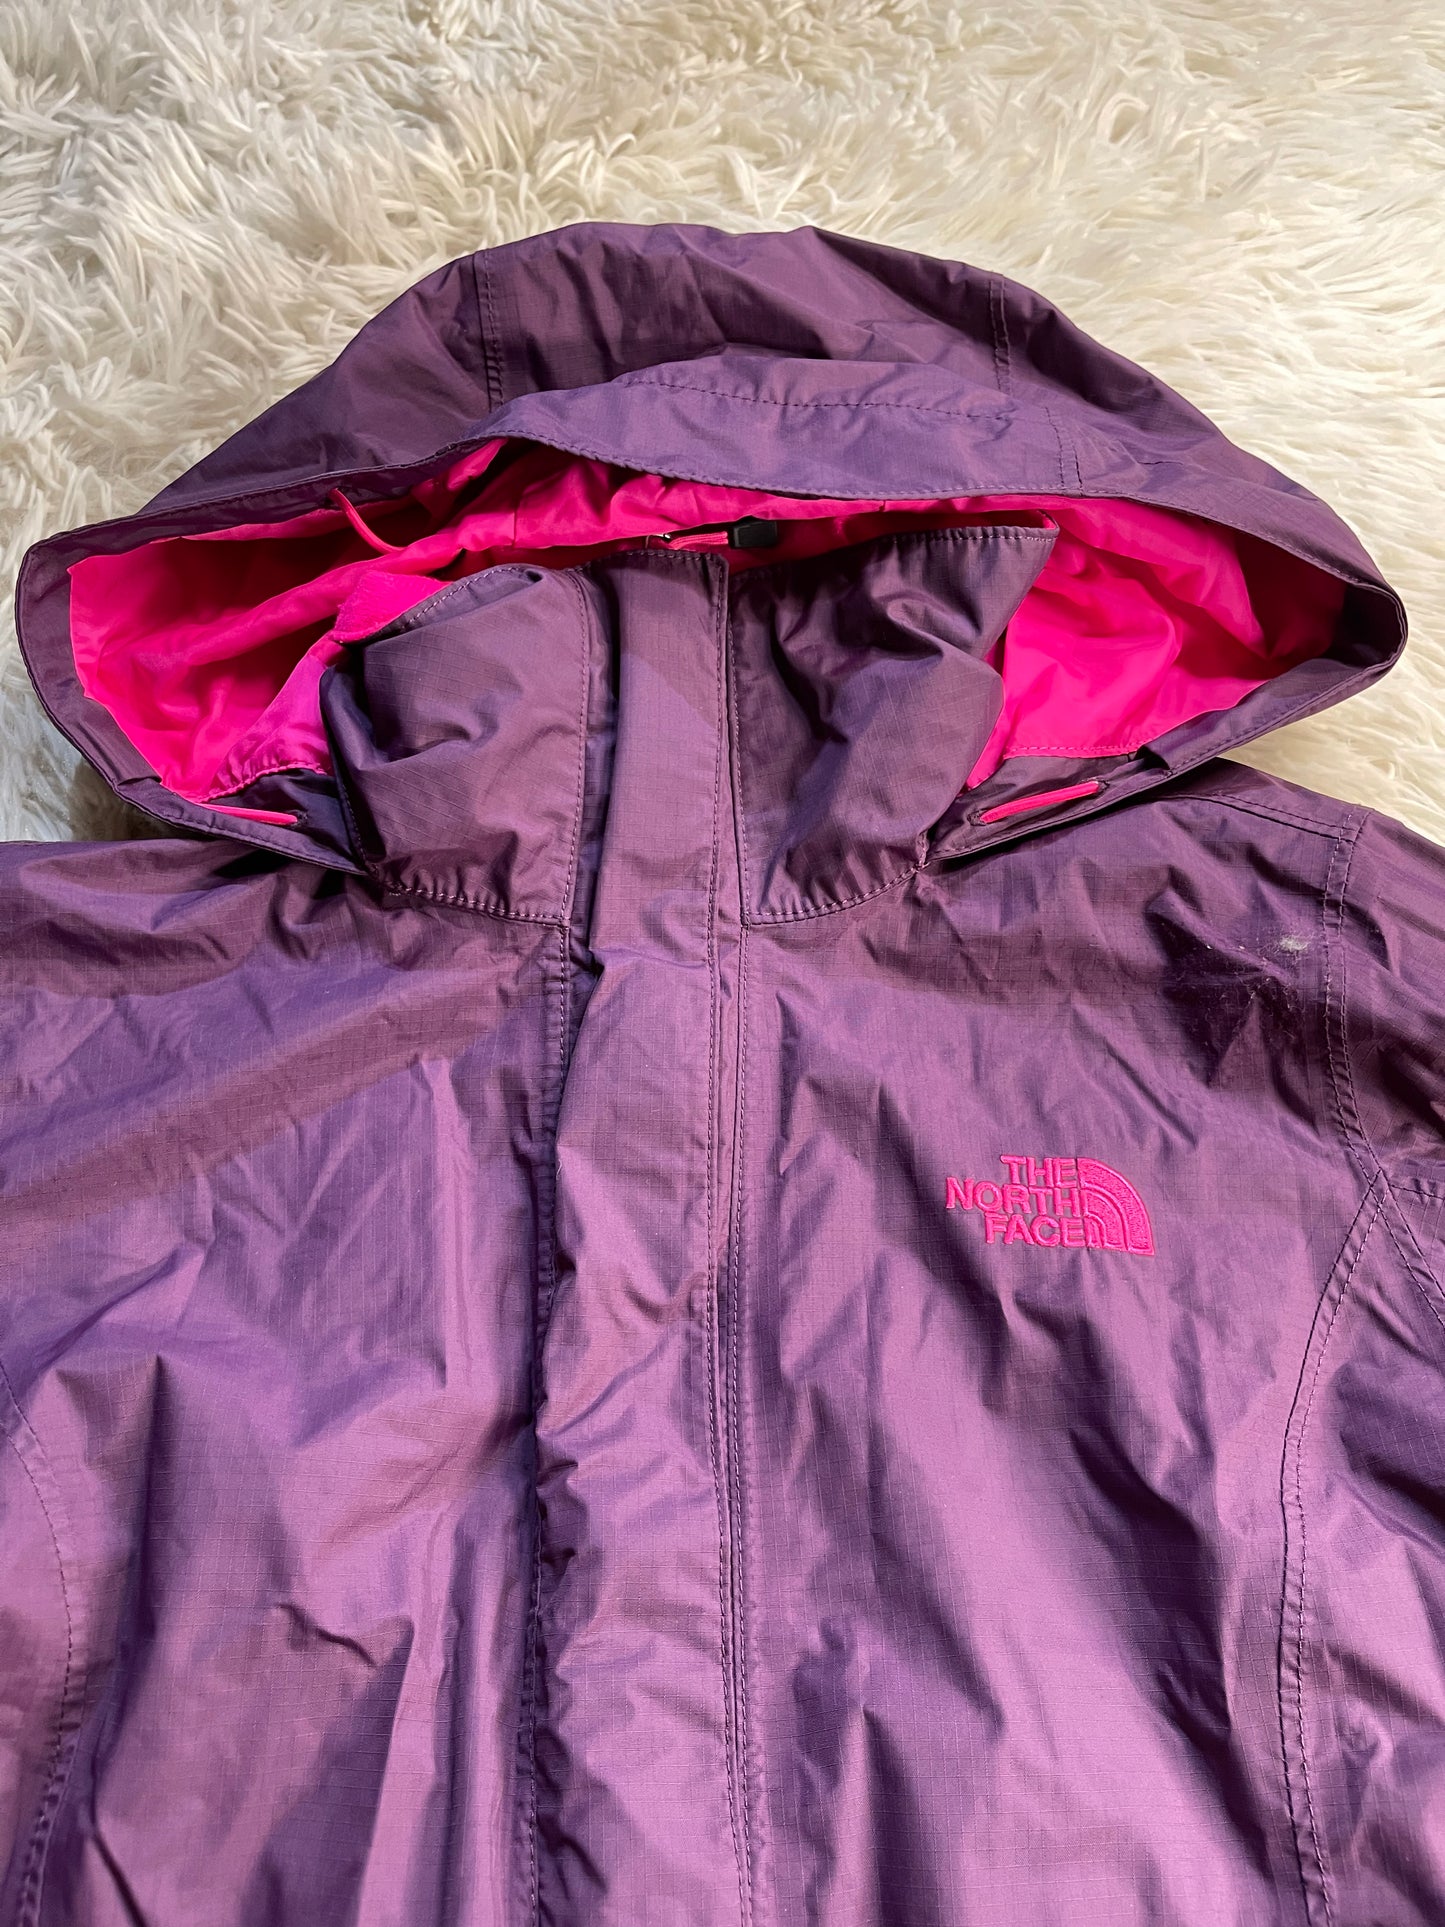 The North Face Jacket - XS